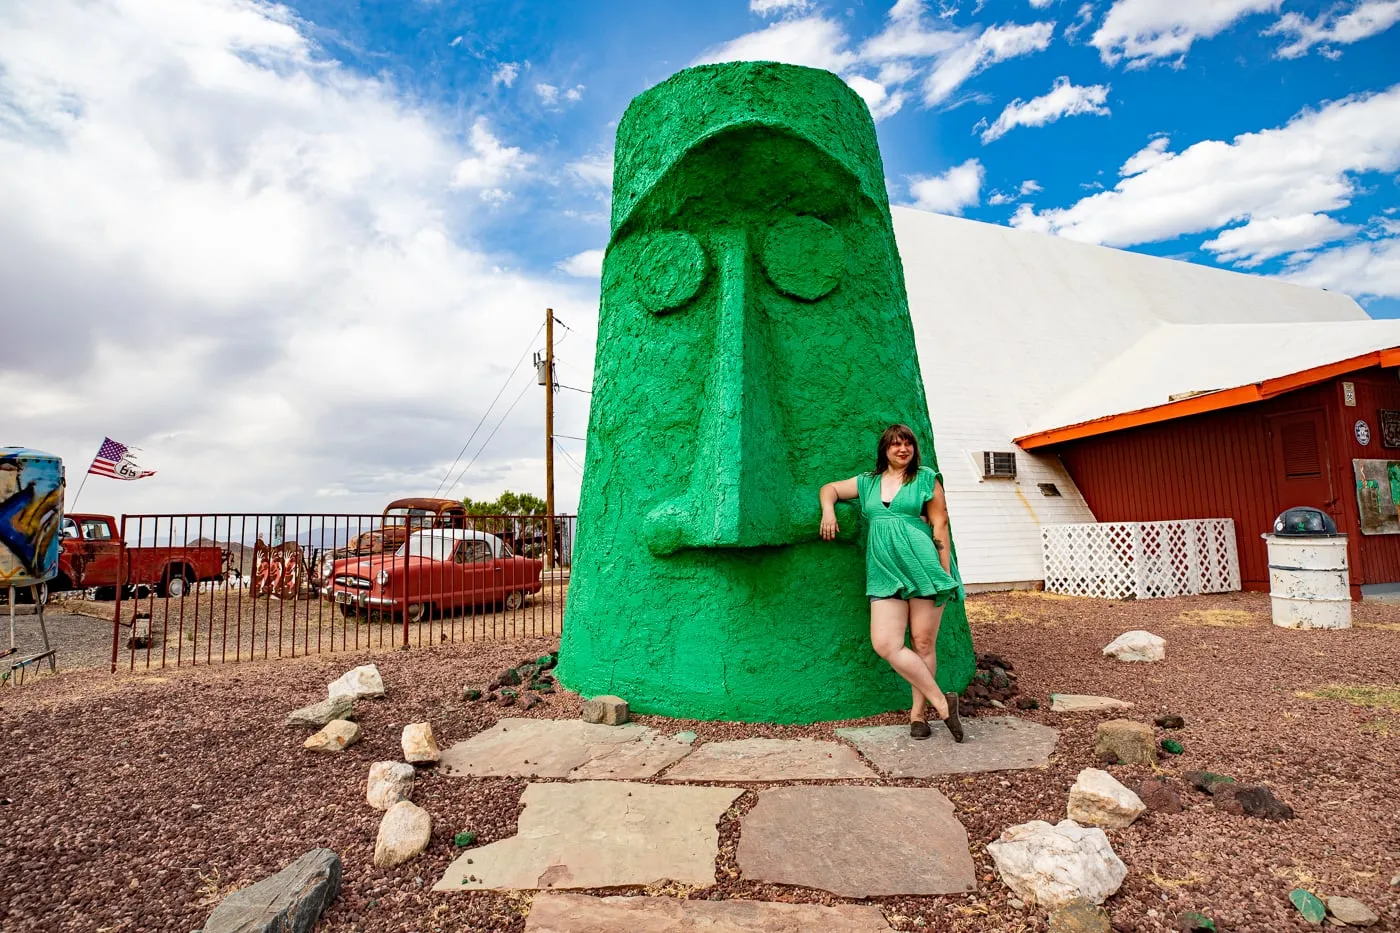 Giganticus Headicus in Kingman, Arizona: Big Green Head on Route 66 Roadside Attraction at Antares Point Visitor Center & Gift Shop